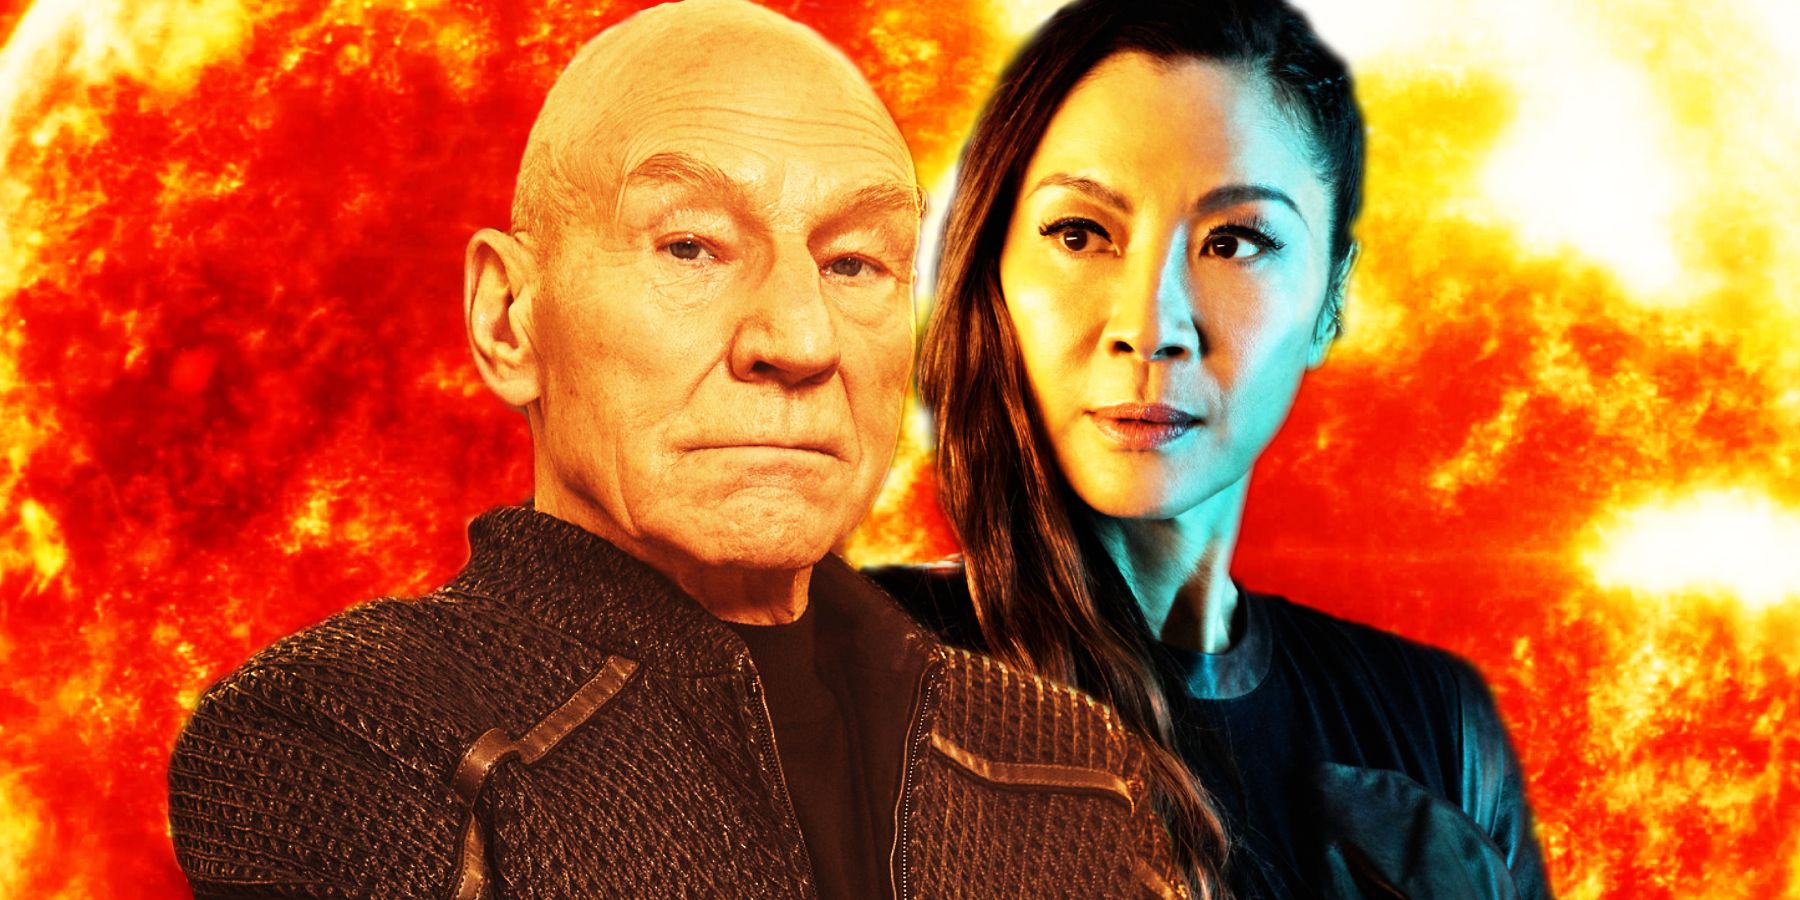 Patrick Stewart from Star Trek: Picard and Michelle Yeoh from Star Trek: Section 31